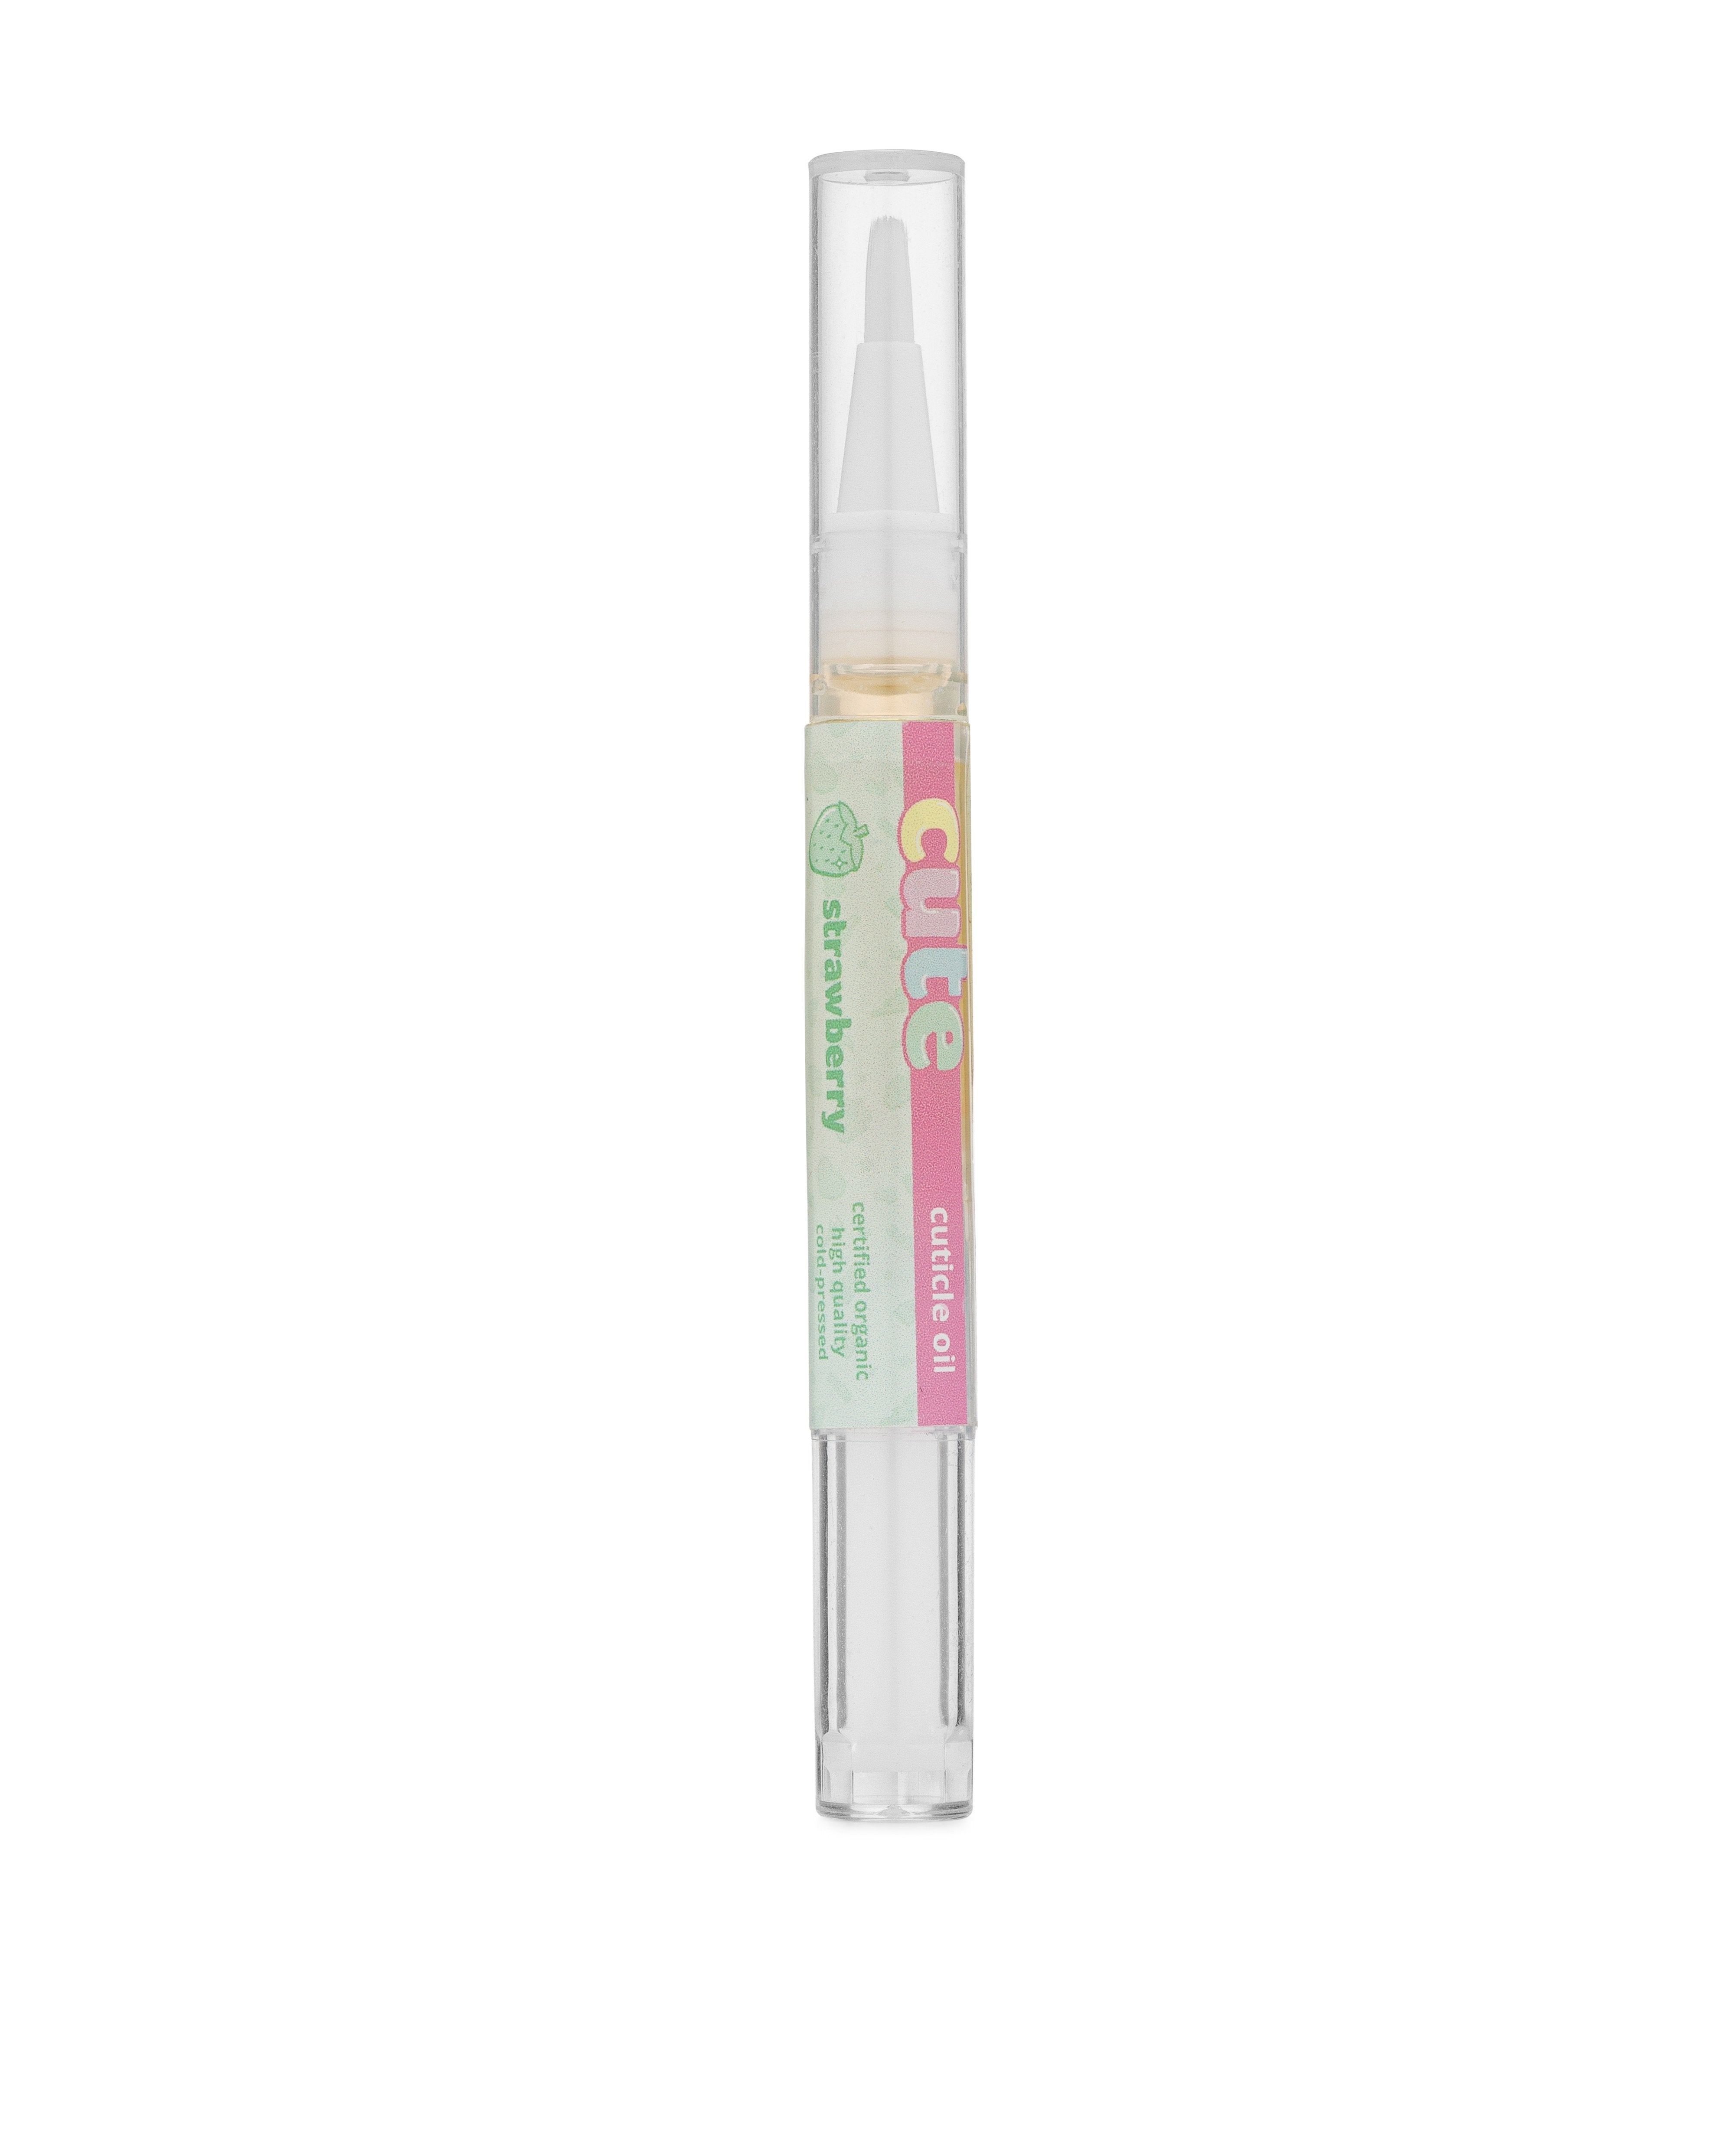 All Natural Crystal Infused Cuticle Oil Pen